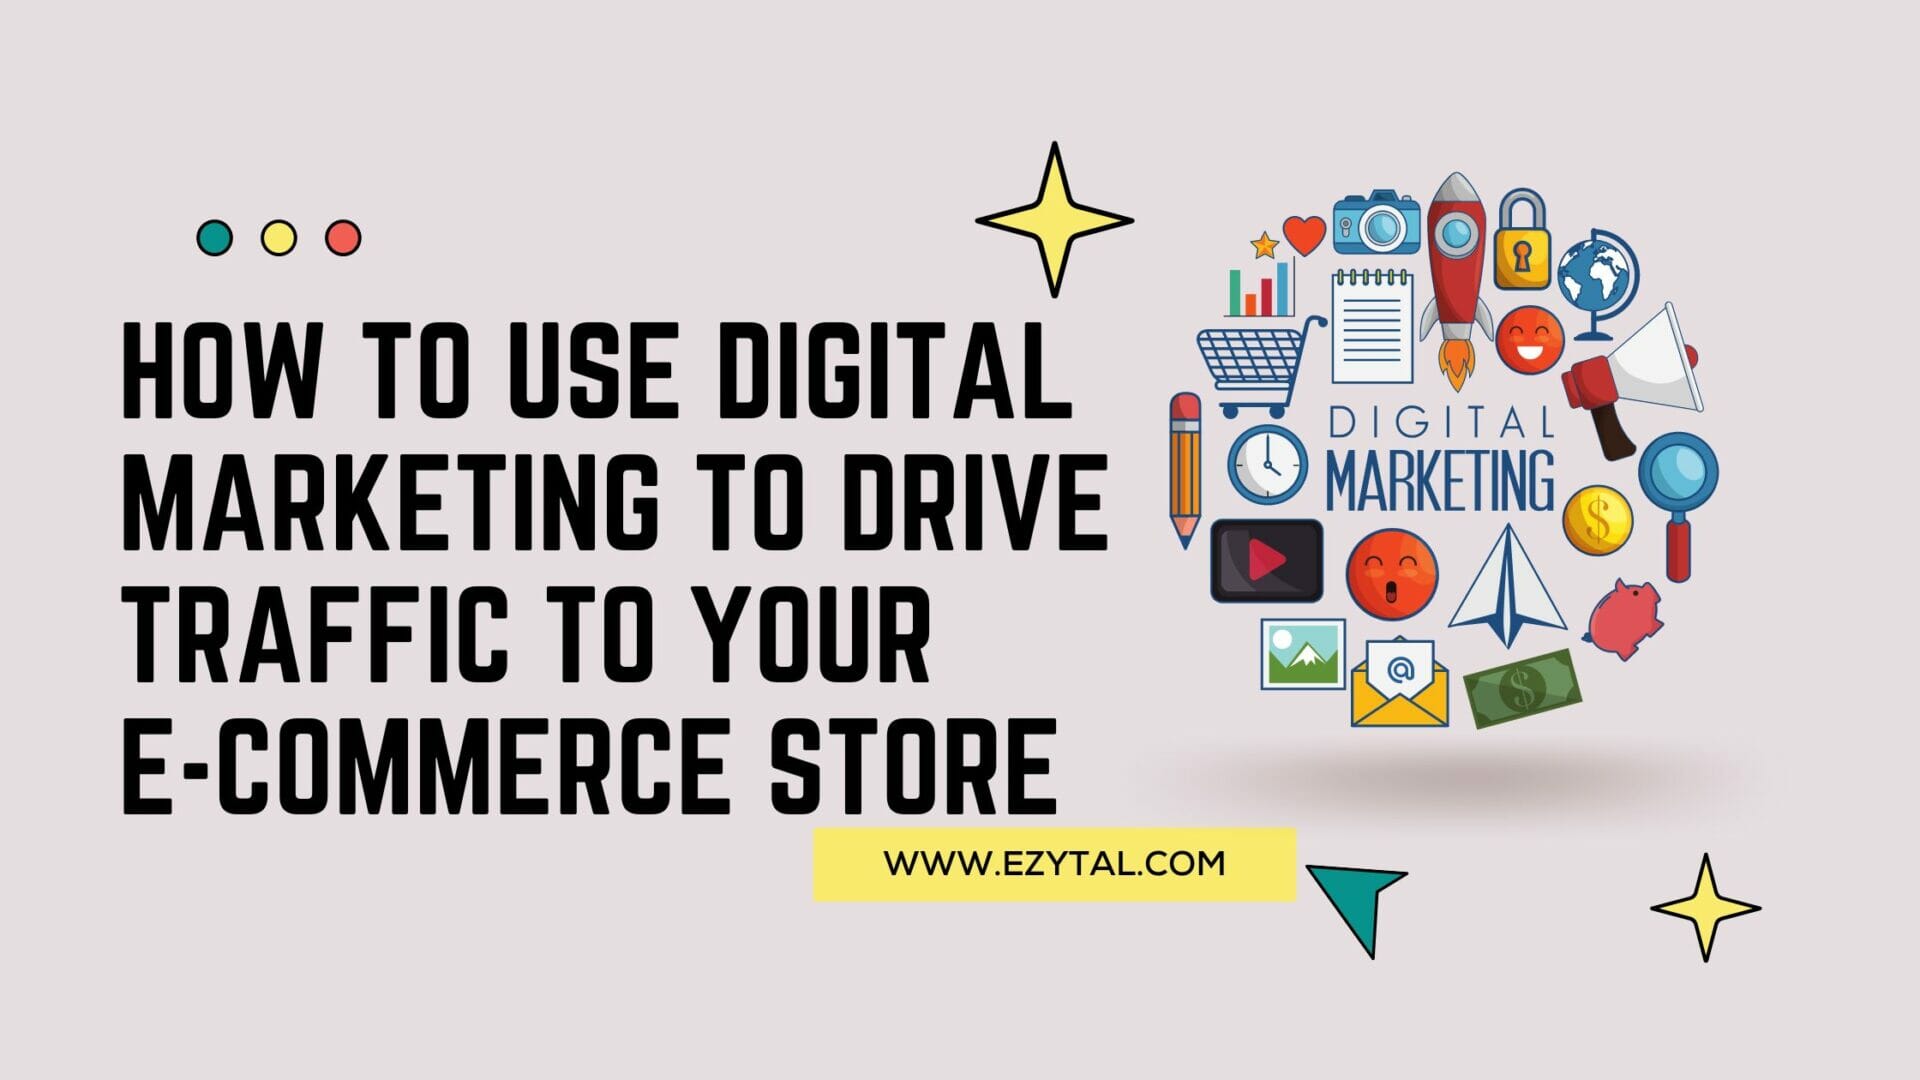 How to use digital marketing to drive traffic to your e-commerce store